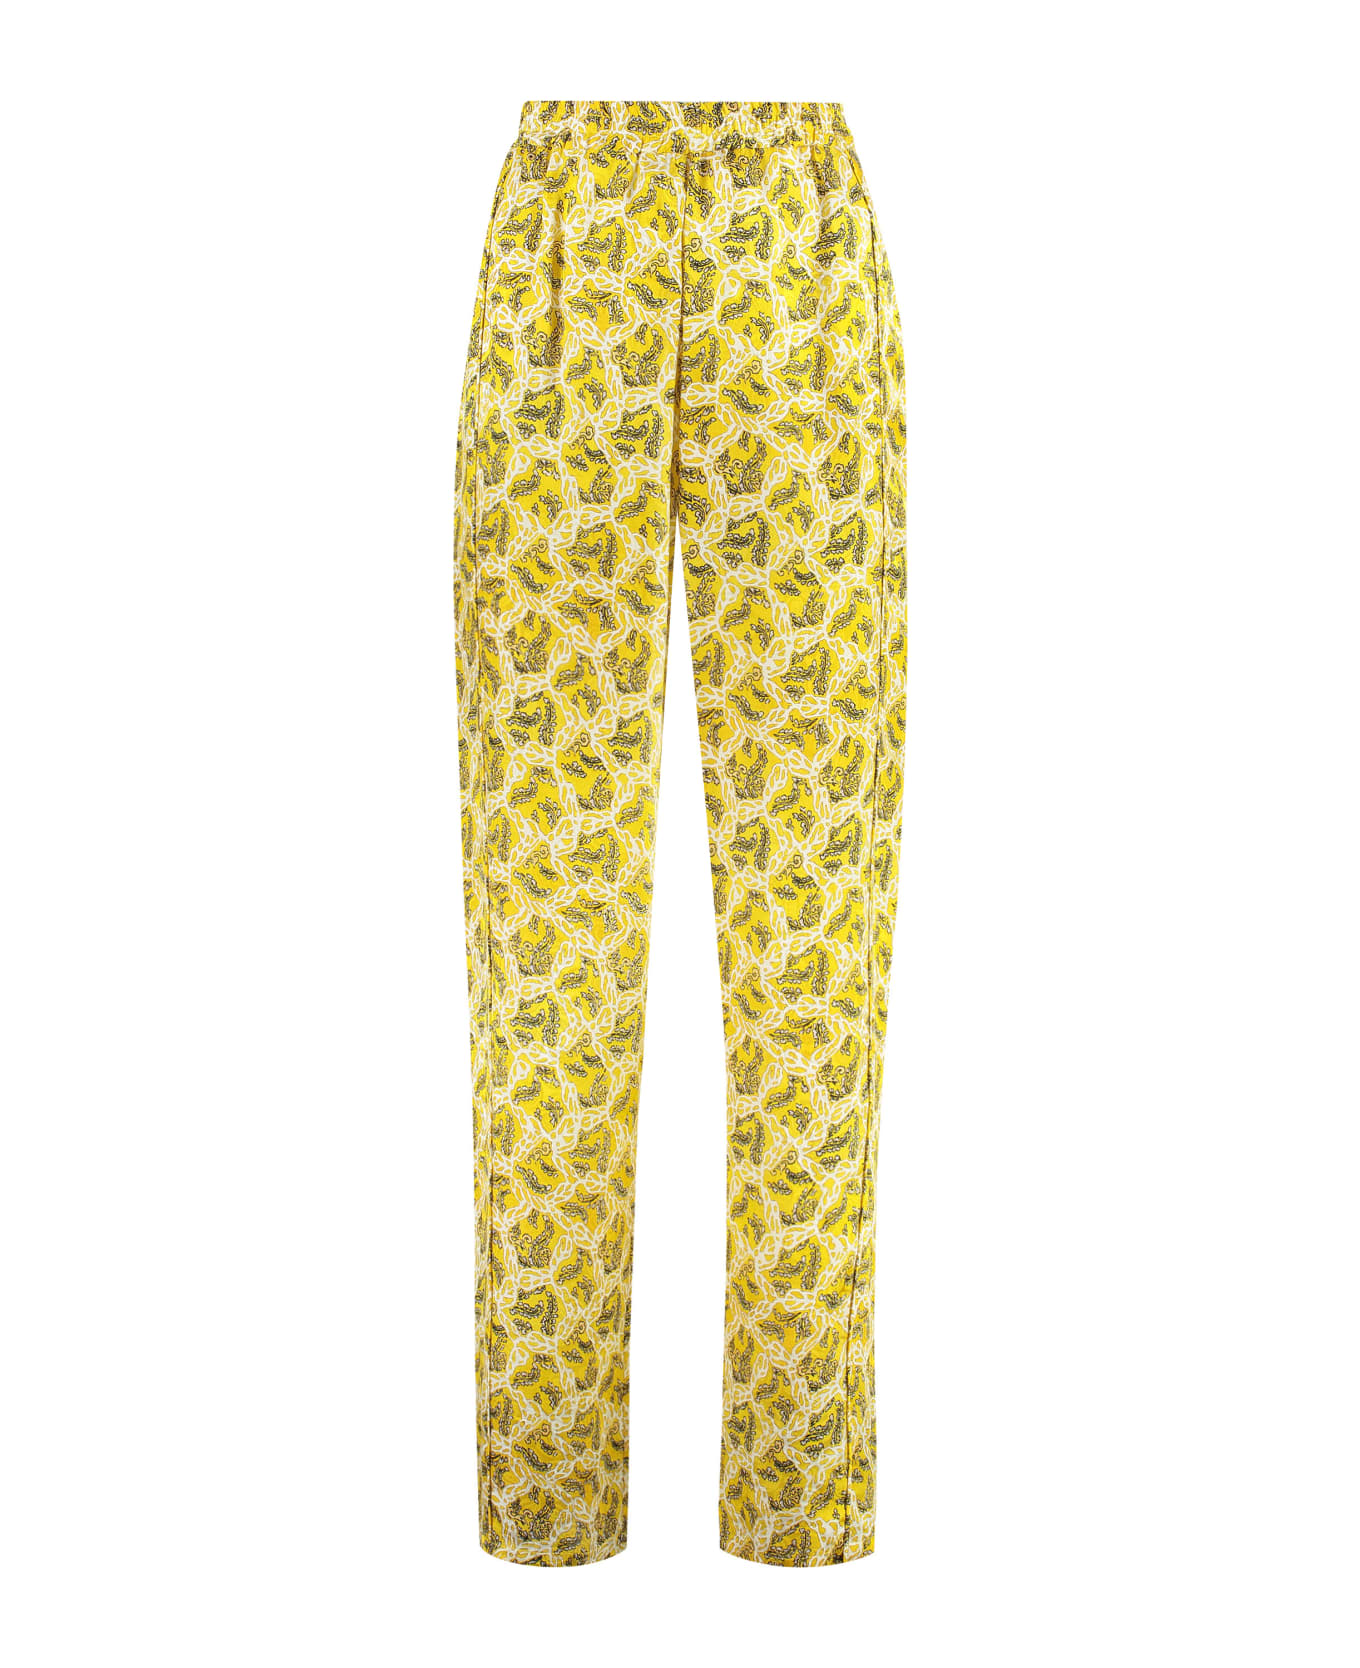 Isabel Marant Piera Printed High-rise Trousers - Yellow ボトムス